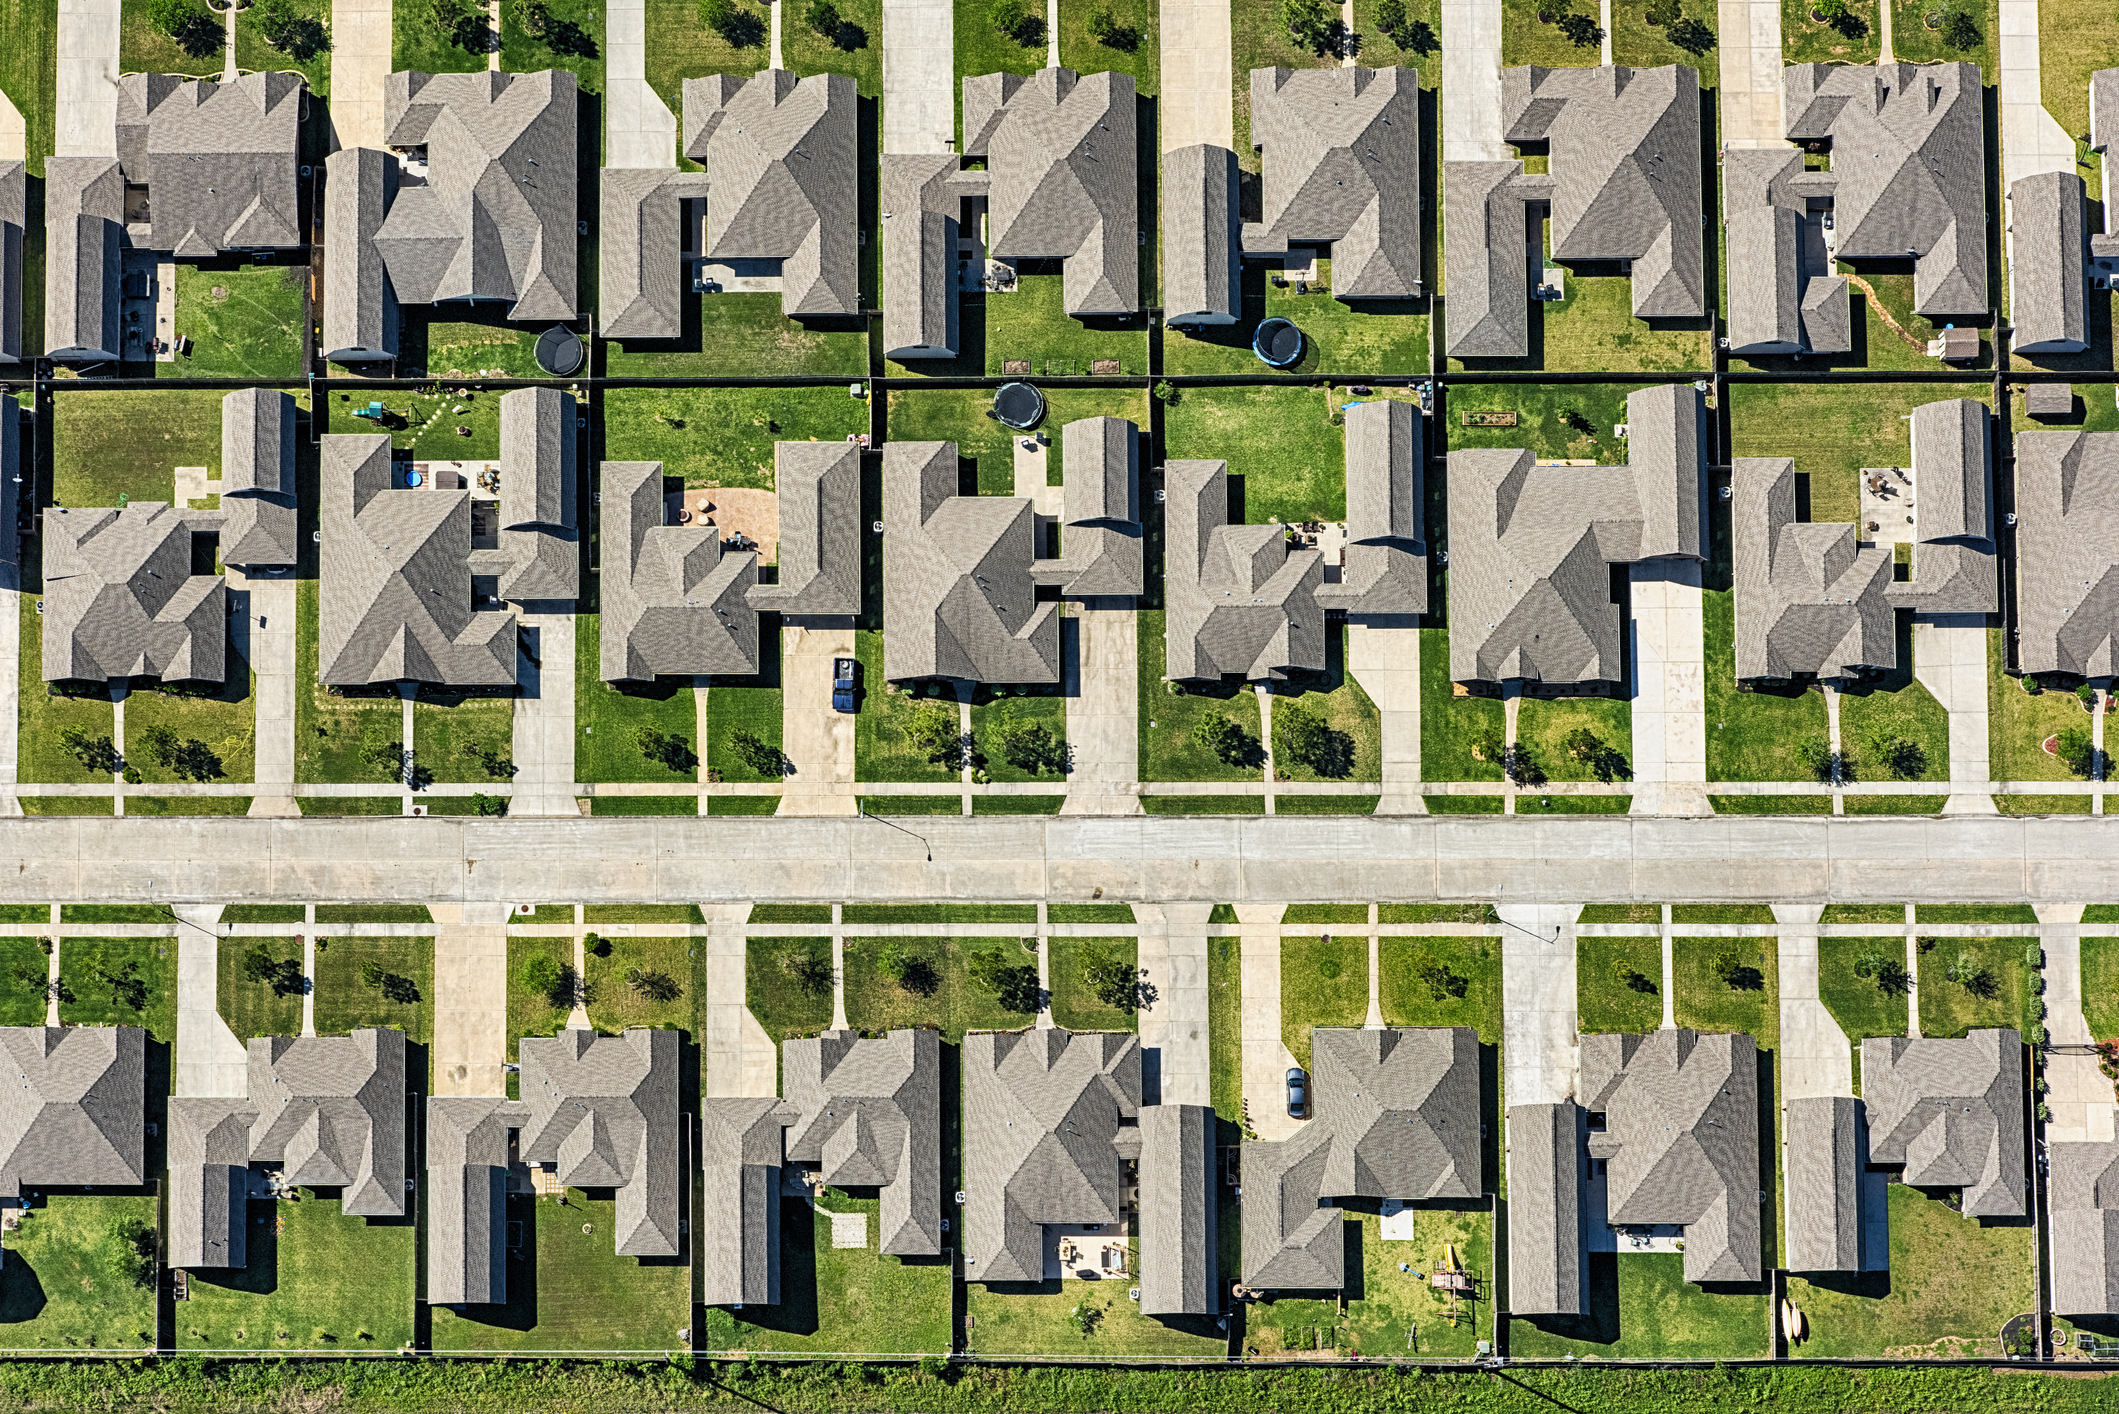 Aerial view of a suburban neighborhood with uniform houses and tidy yards